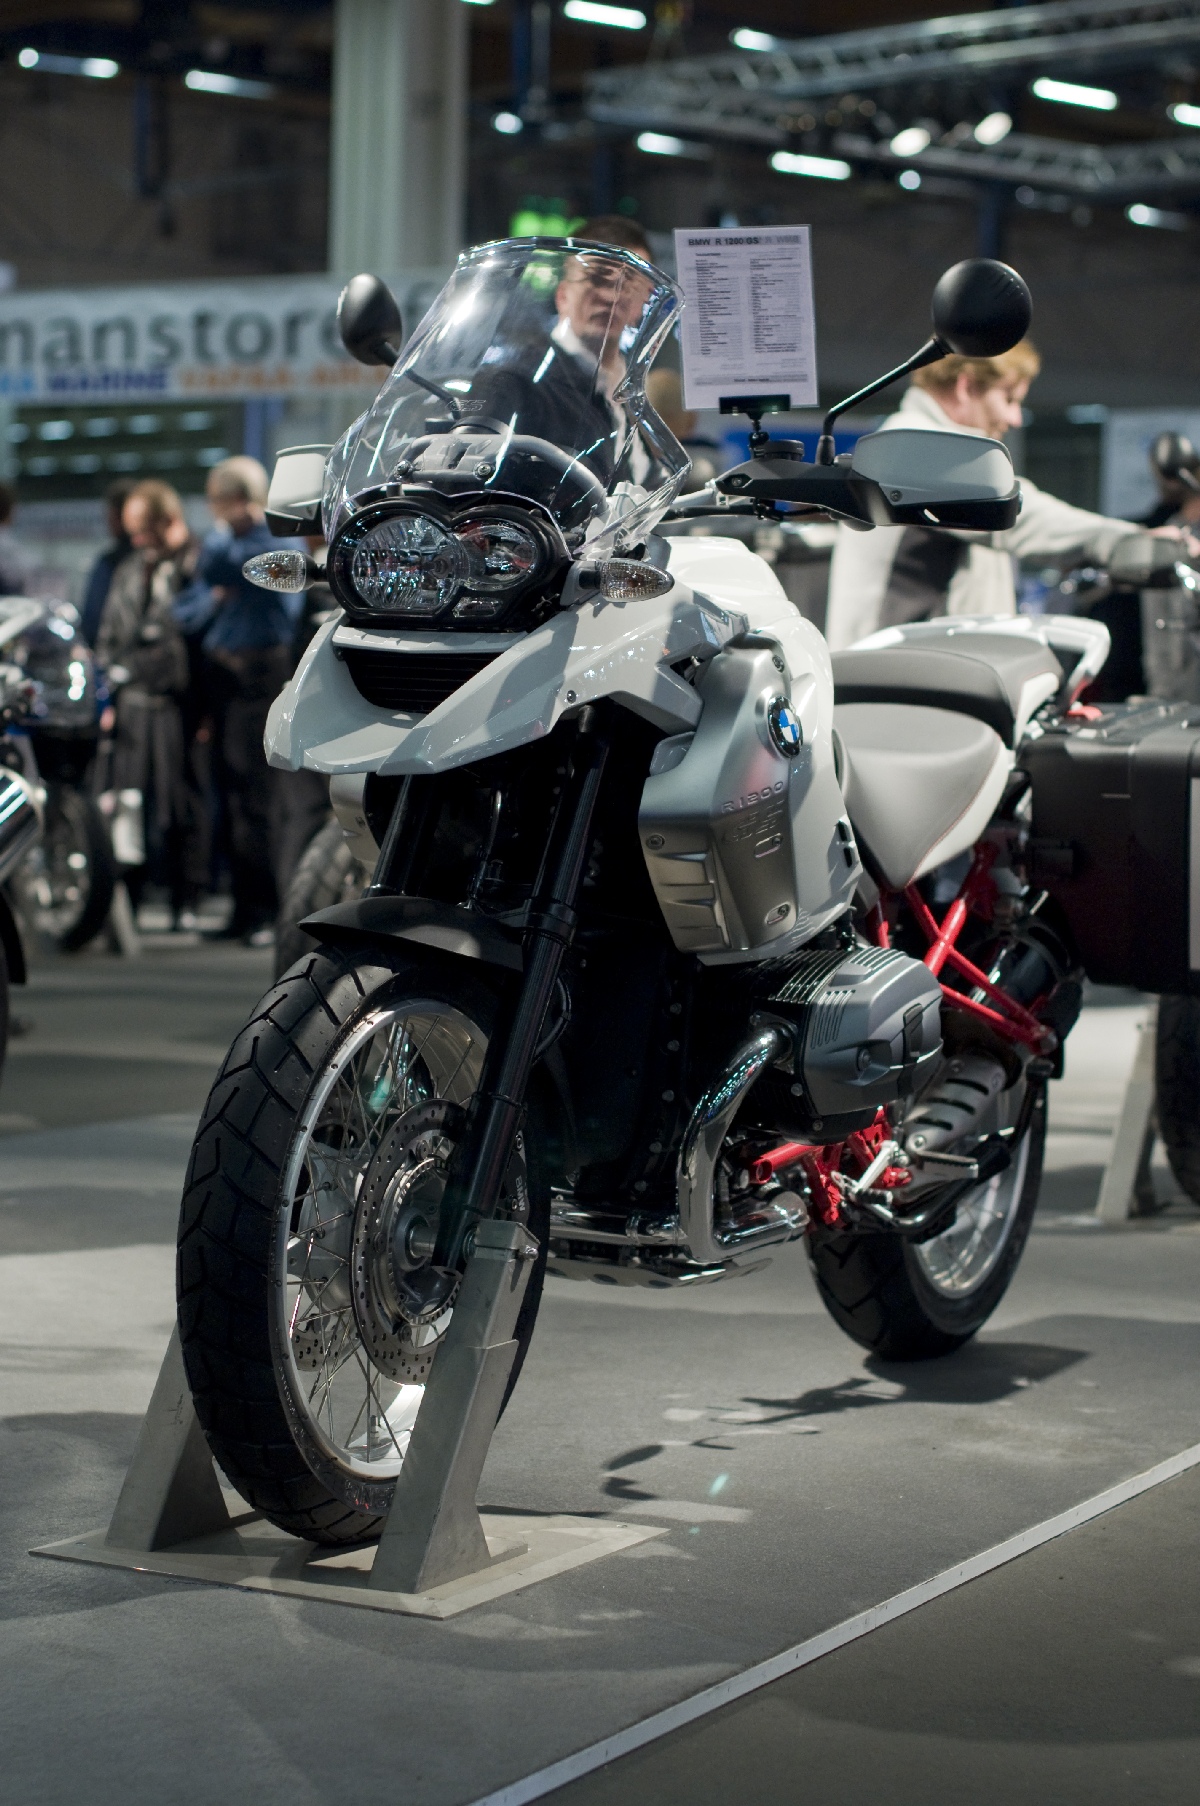 BMW R 1200 GS. MP 12 Motorcycle Show.